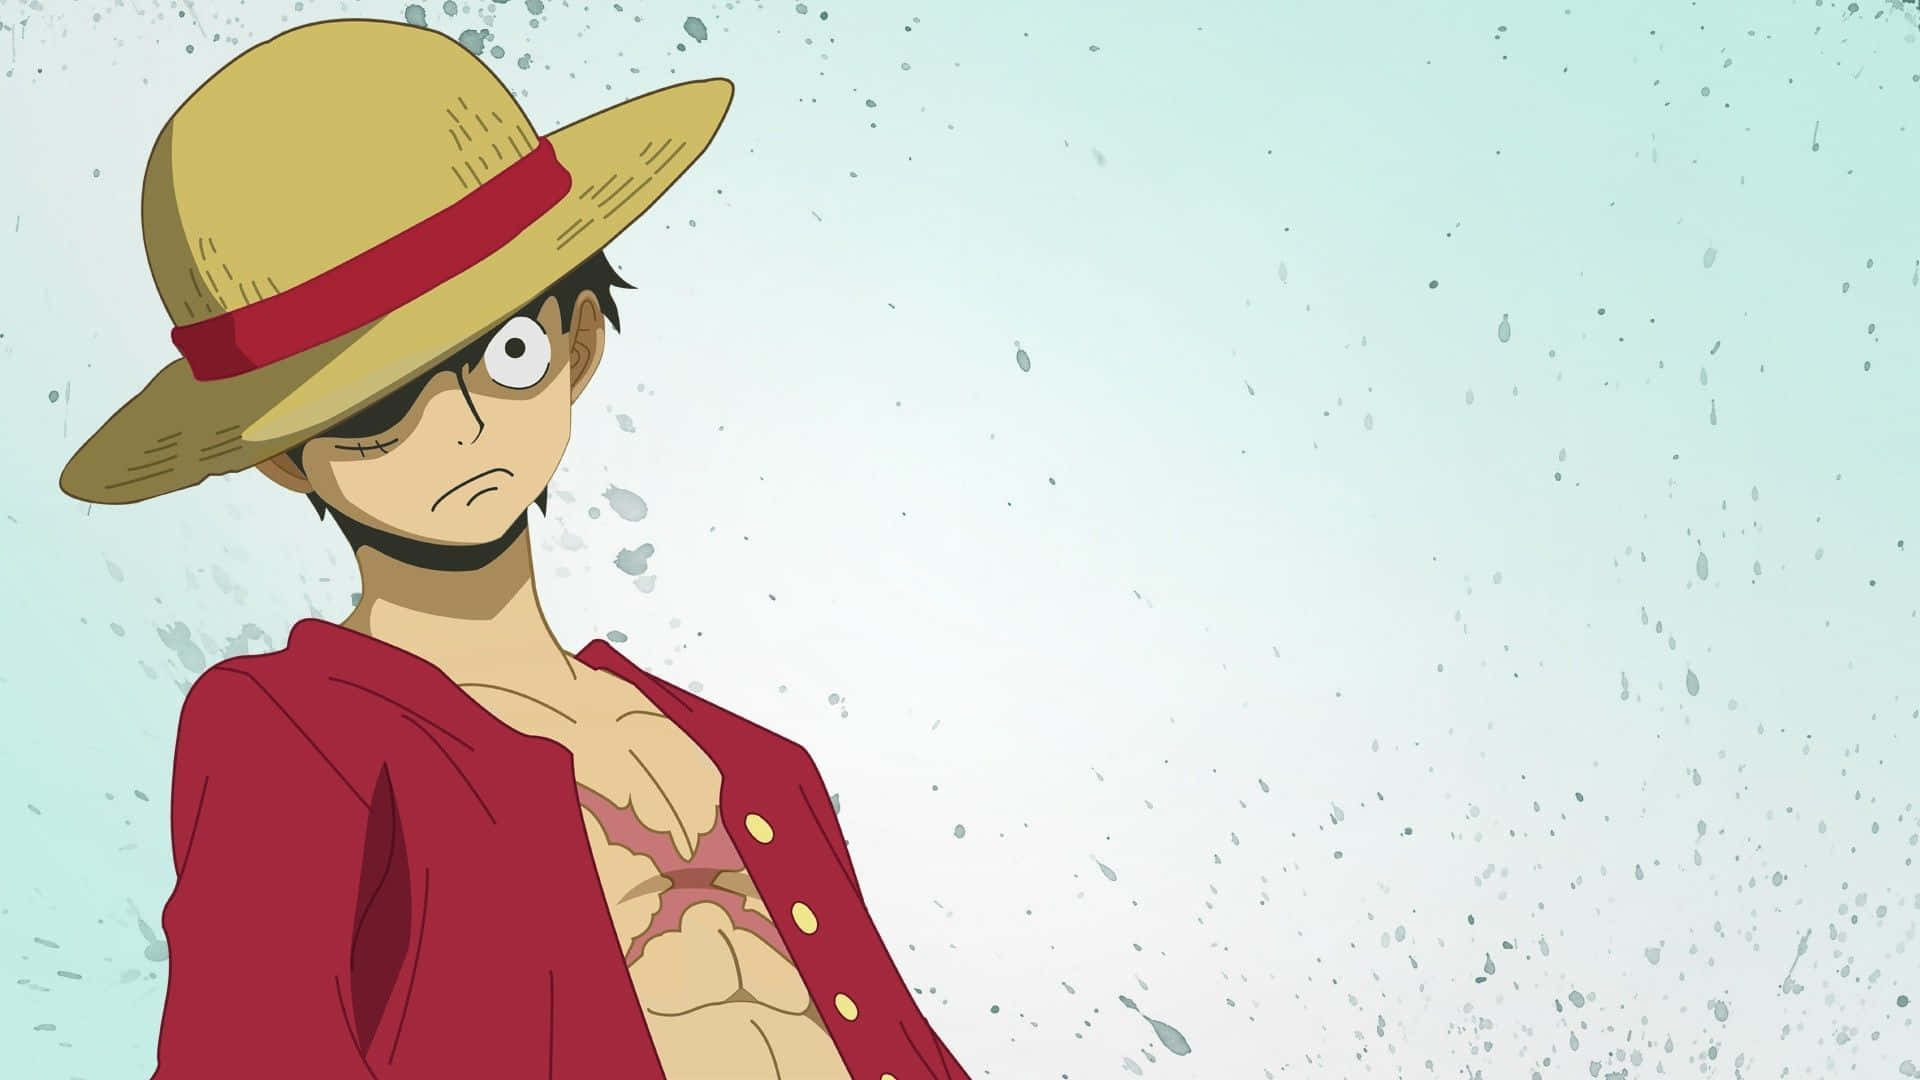 Cool Luffy Looks Ready To Take On The World!